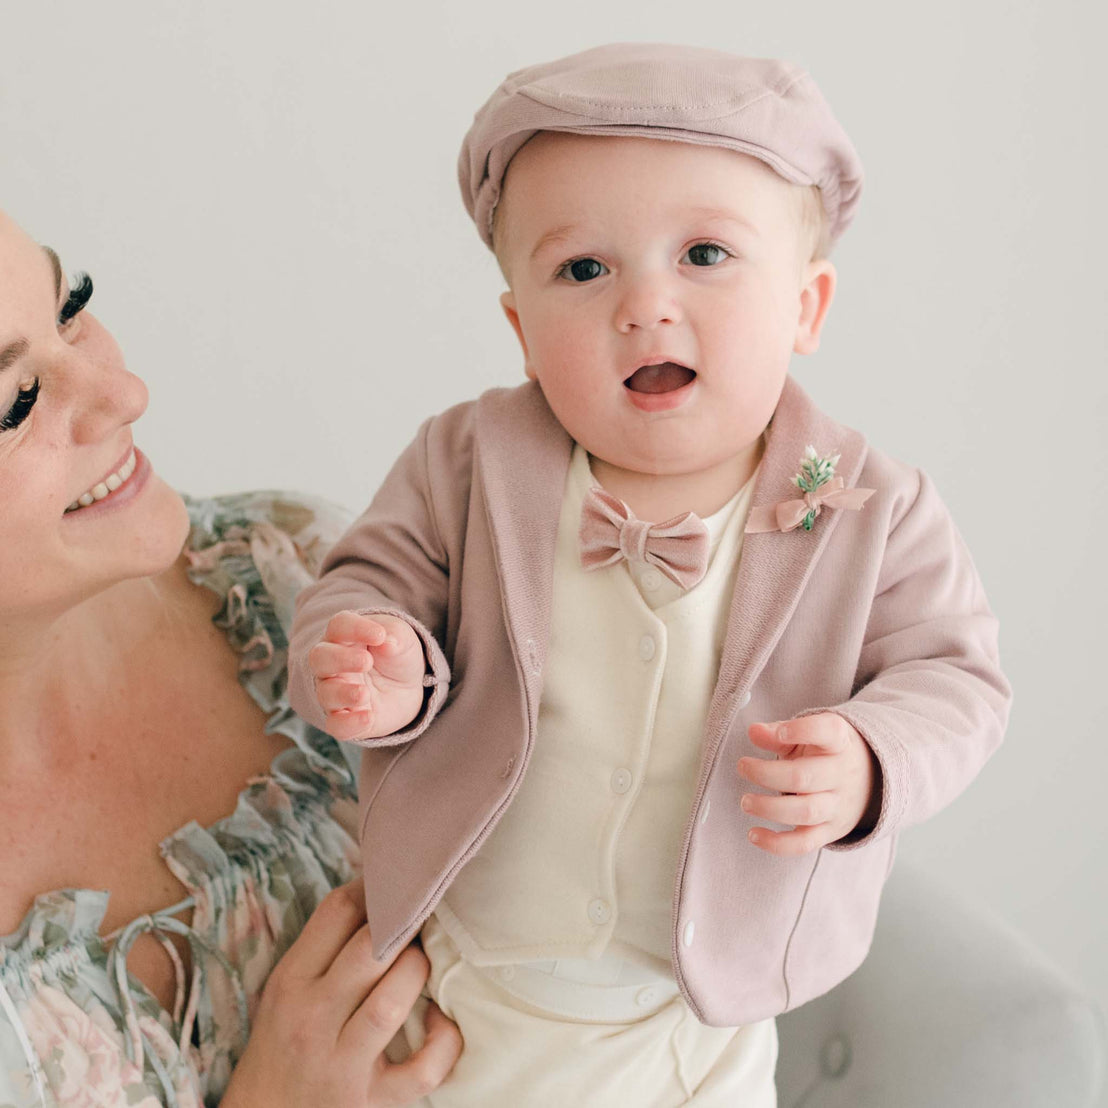 Closer detail of baby boy standing his mother's lap. He is wearing the Ezra 4-Piece Mauve Suit with matching Newsboy Cap, mauve velvet bow tie and boutonniere